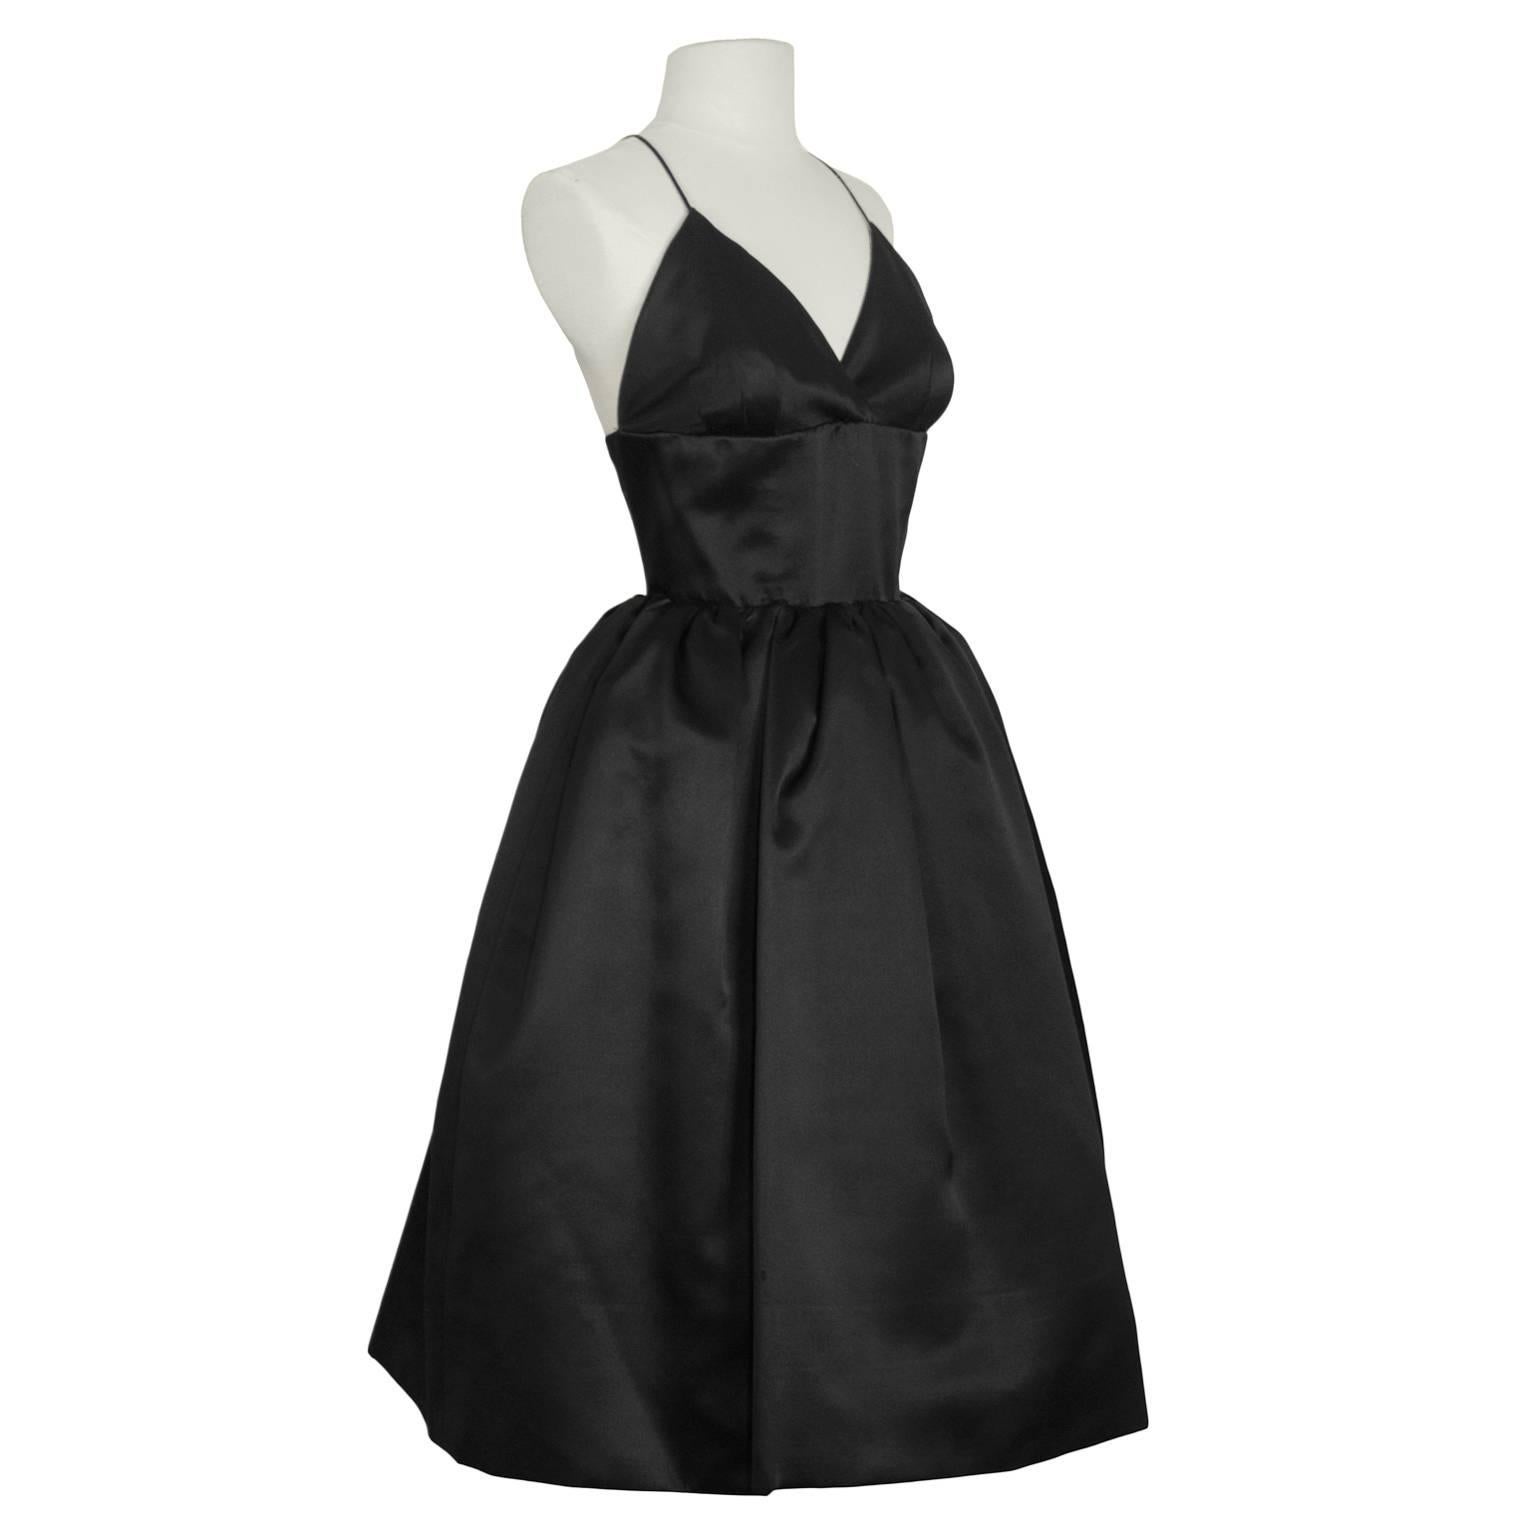 Norman Norell 1950's demi couture for I Magnin black satin cocktail dress with spaghetti strap plunging v neckline. Fitted bodice and pouf skirt with built in crinoline. Straps criss cross in the back, and fastens with two zippers and a waist